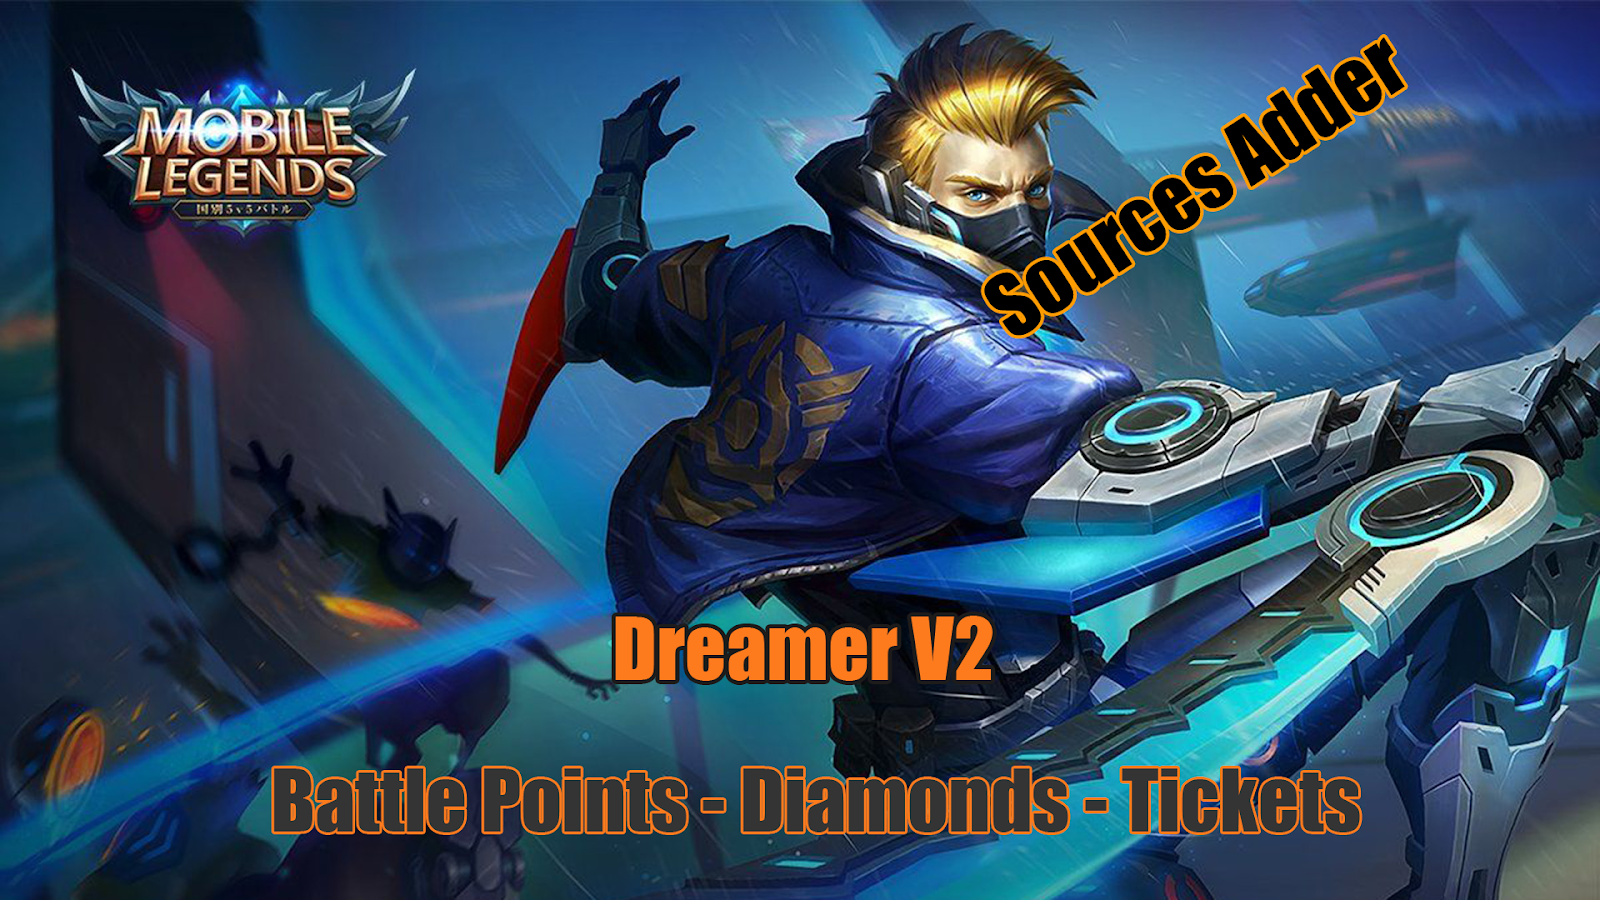 Mobile Legends Add Battle Points,Tickets,Diamonds With Dreamer v2